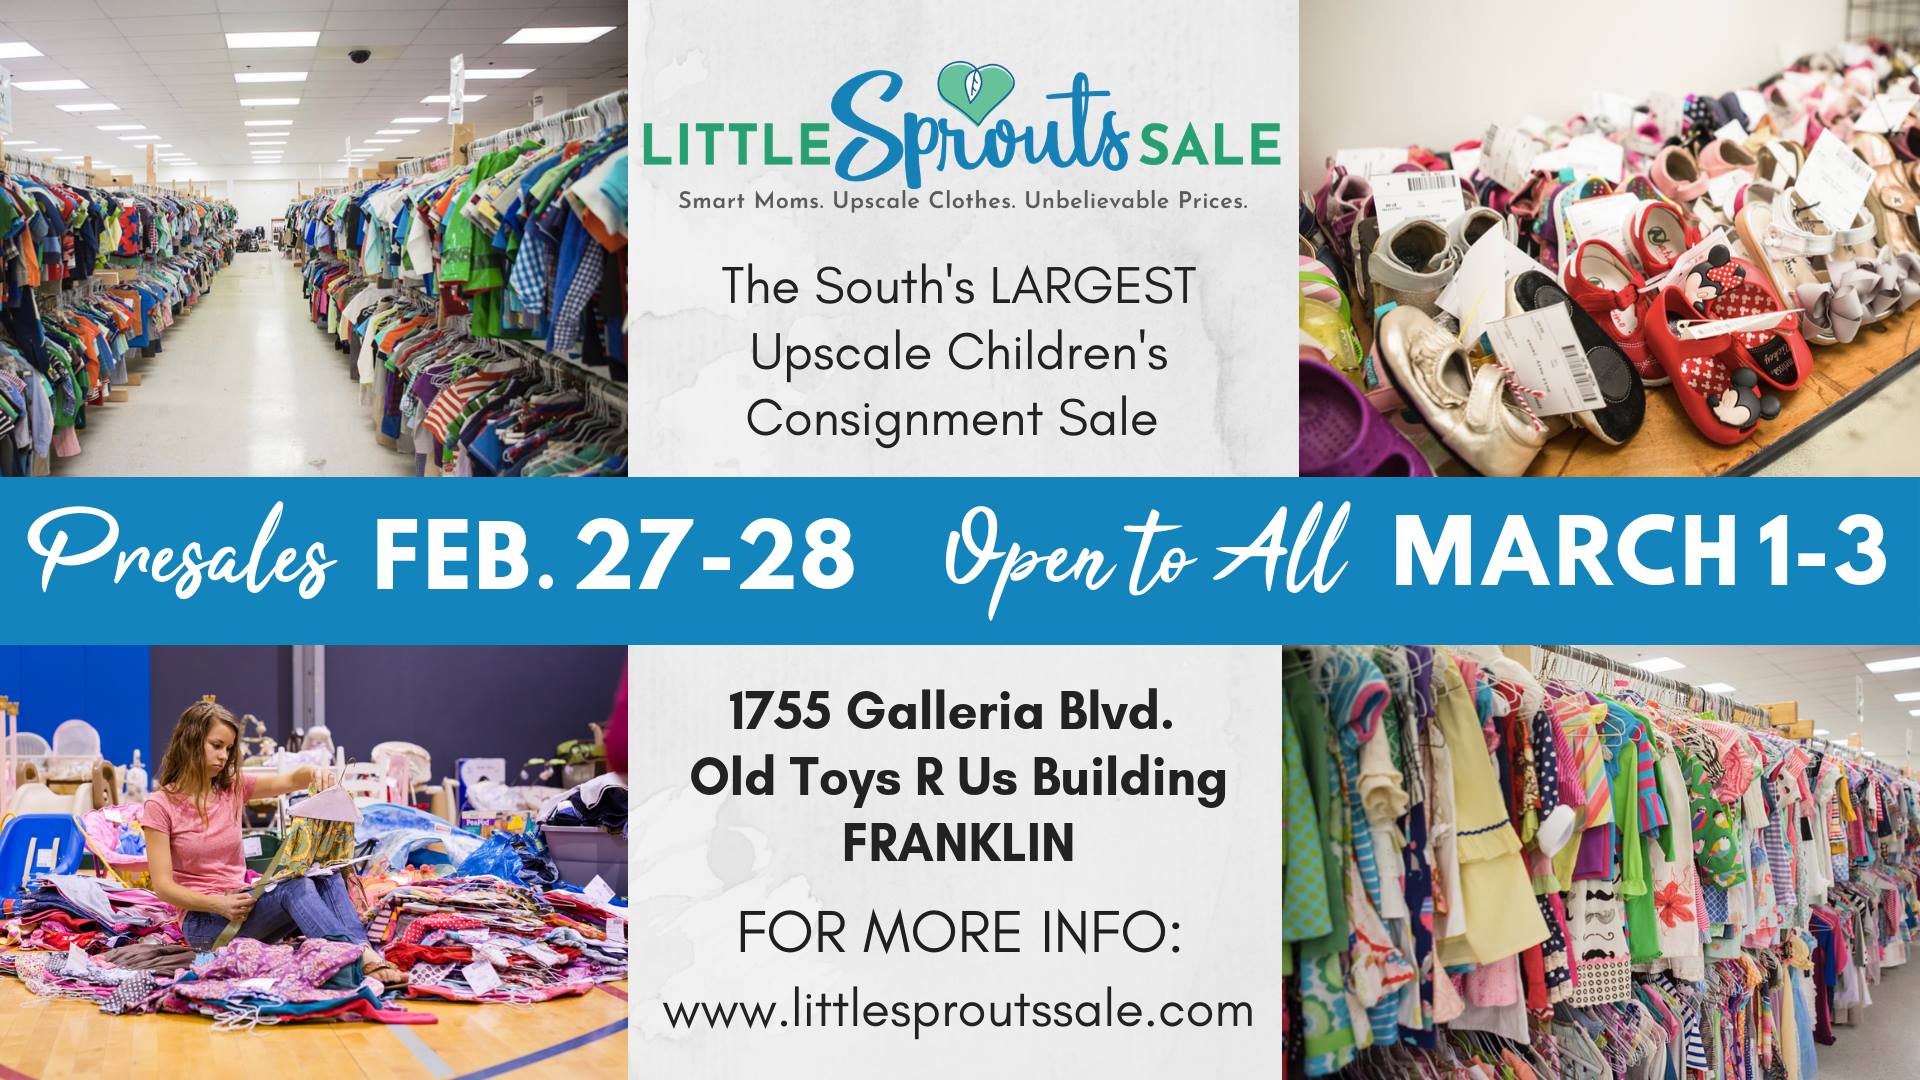 Little Sprouts Upscale Consignment